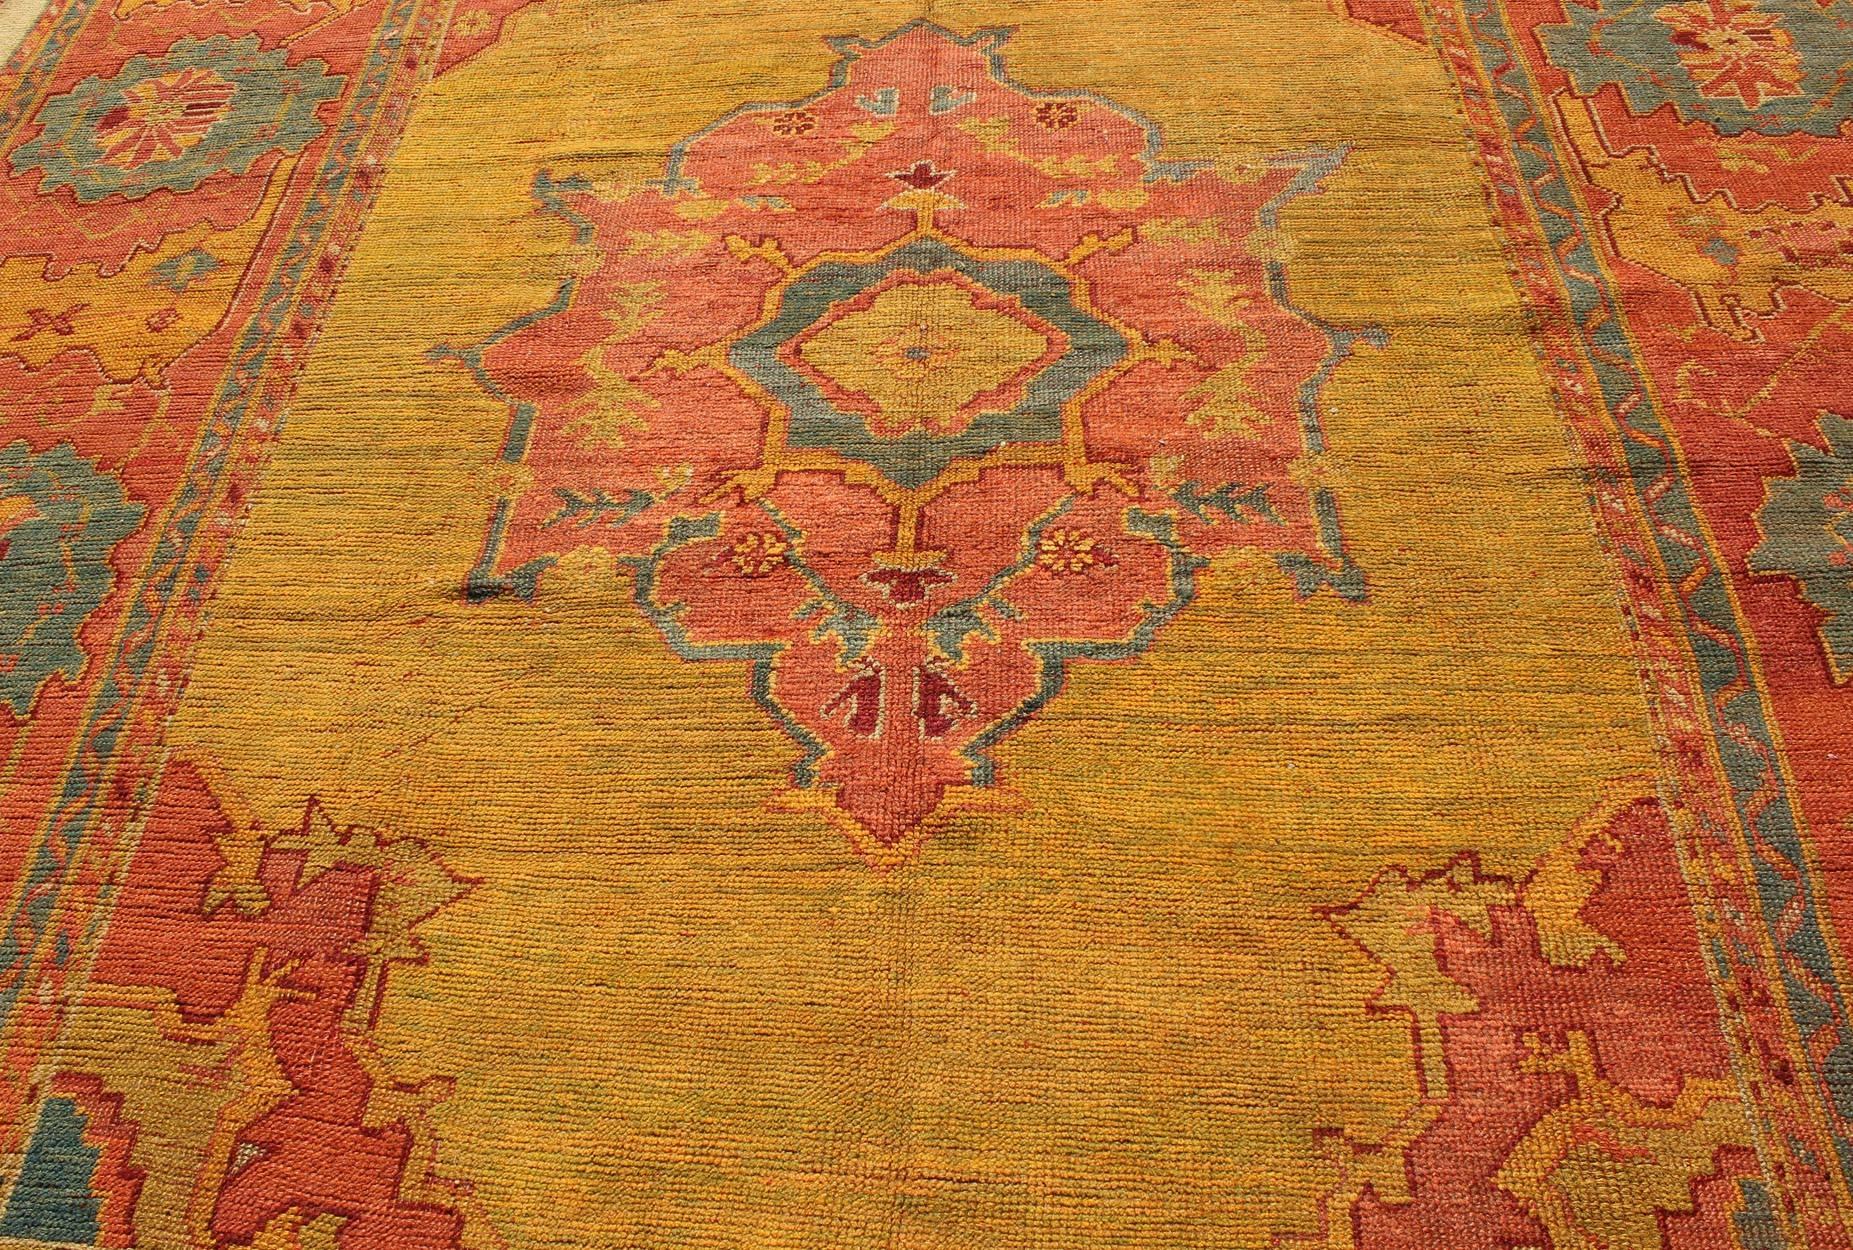 Antique Turkish Oushak Rug in  Saturated Gold, Orange Colors and Blue Accent  2